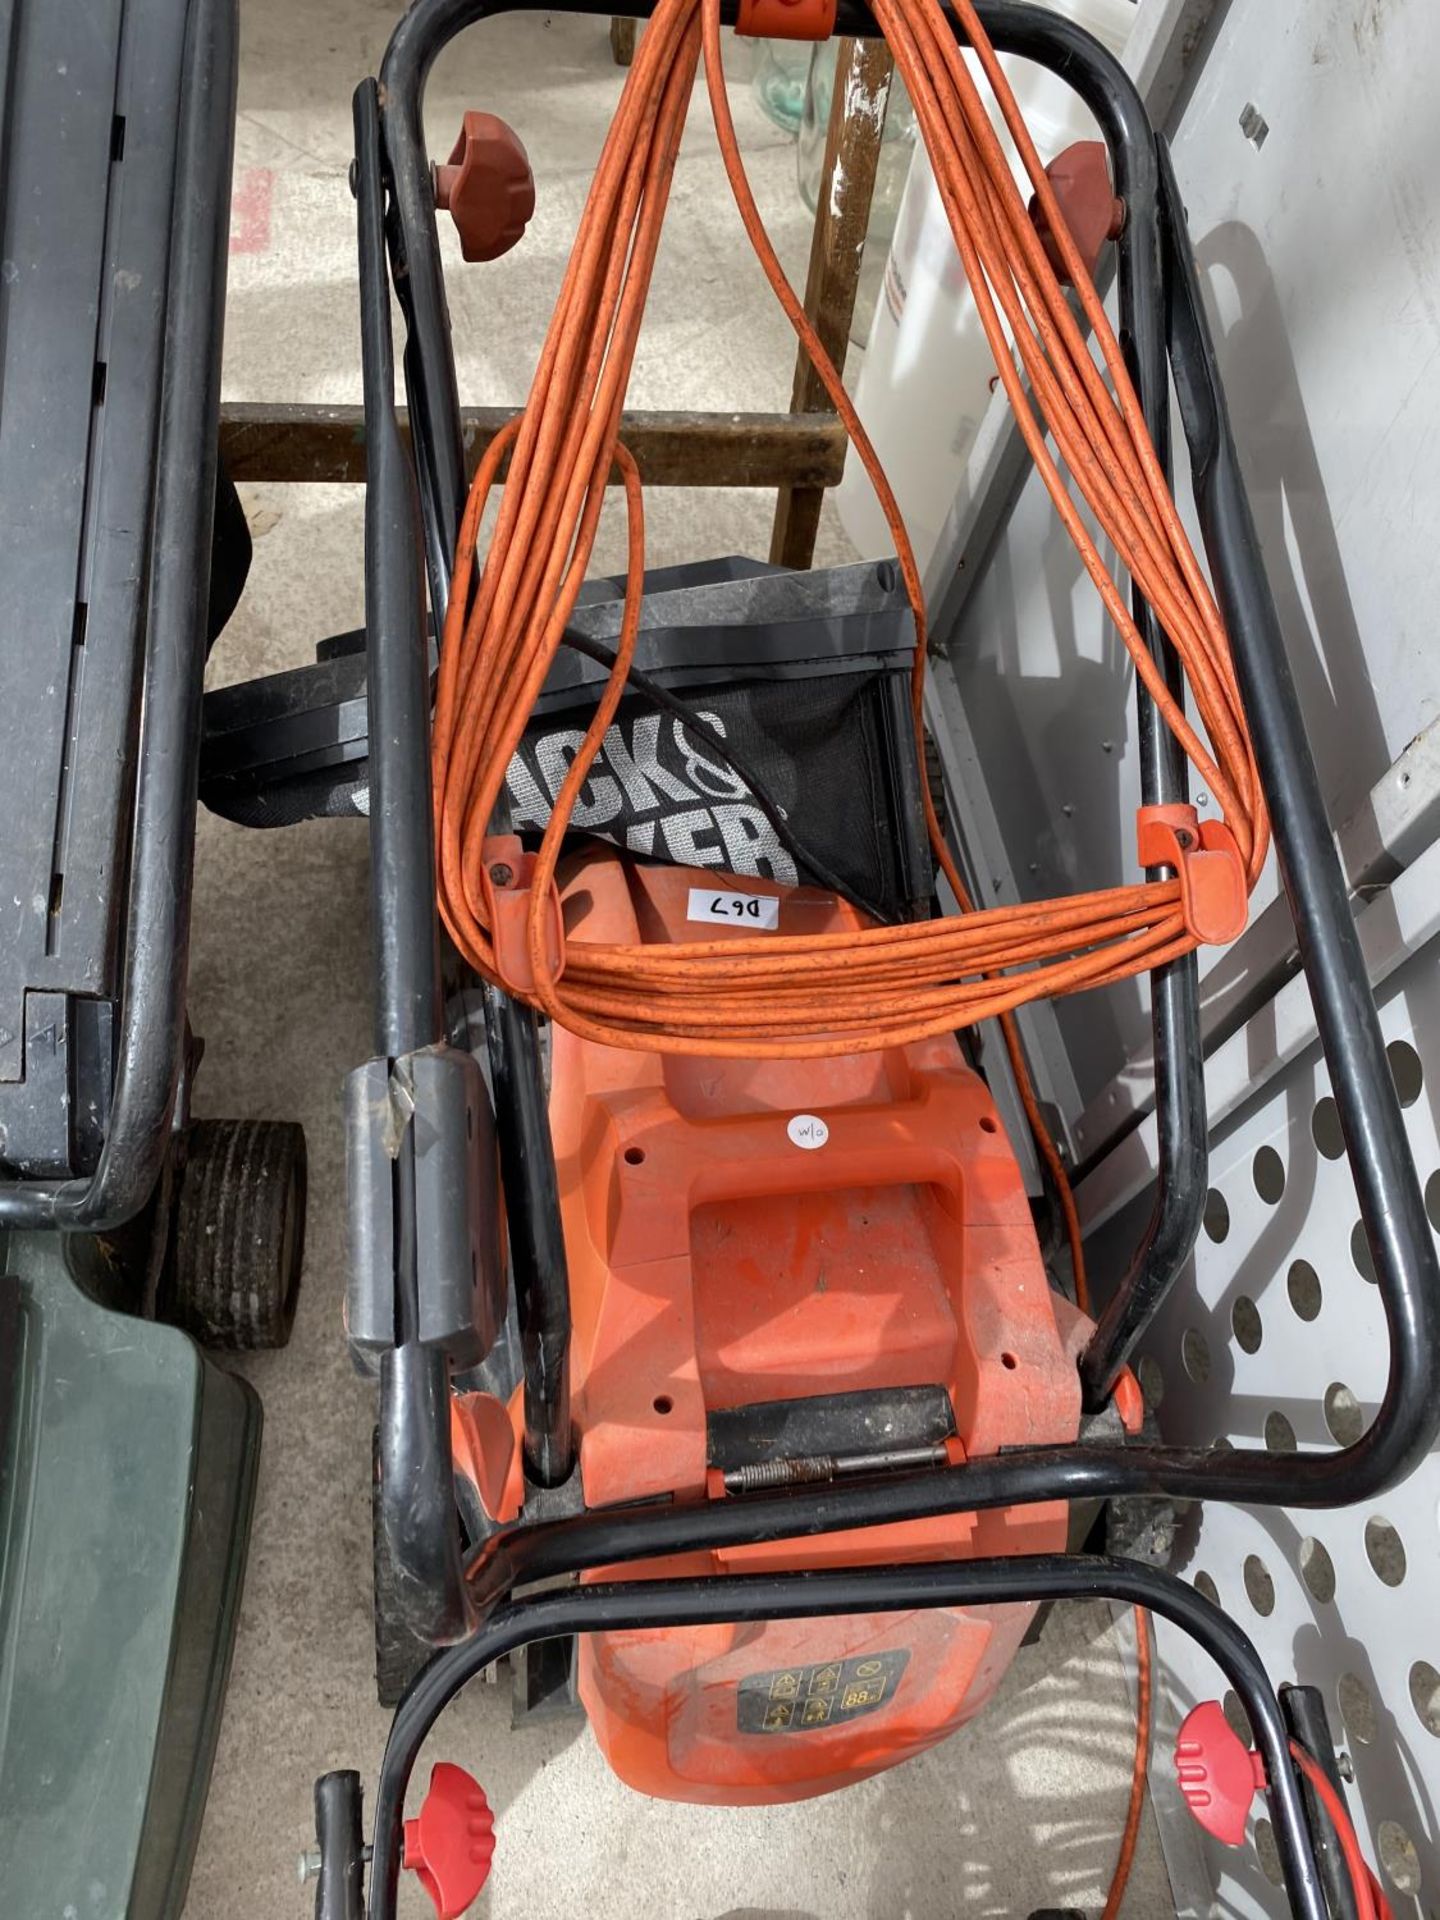 AN ELECTRIC SCARIFIER AND TWO LAWN MOWERS, ALL IN WORKING ORDER - Image 3 of 4